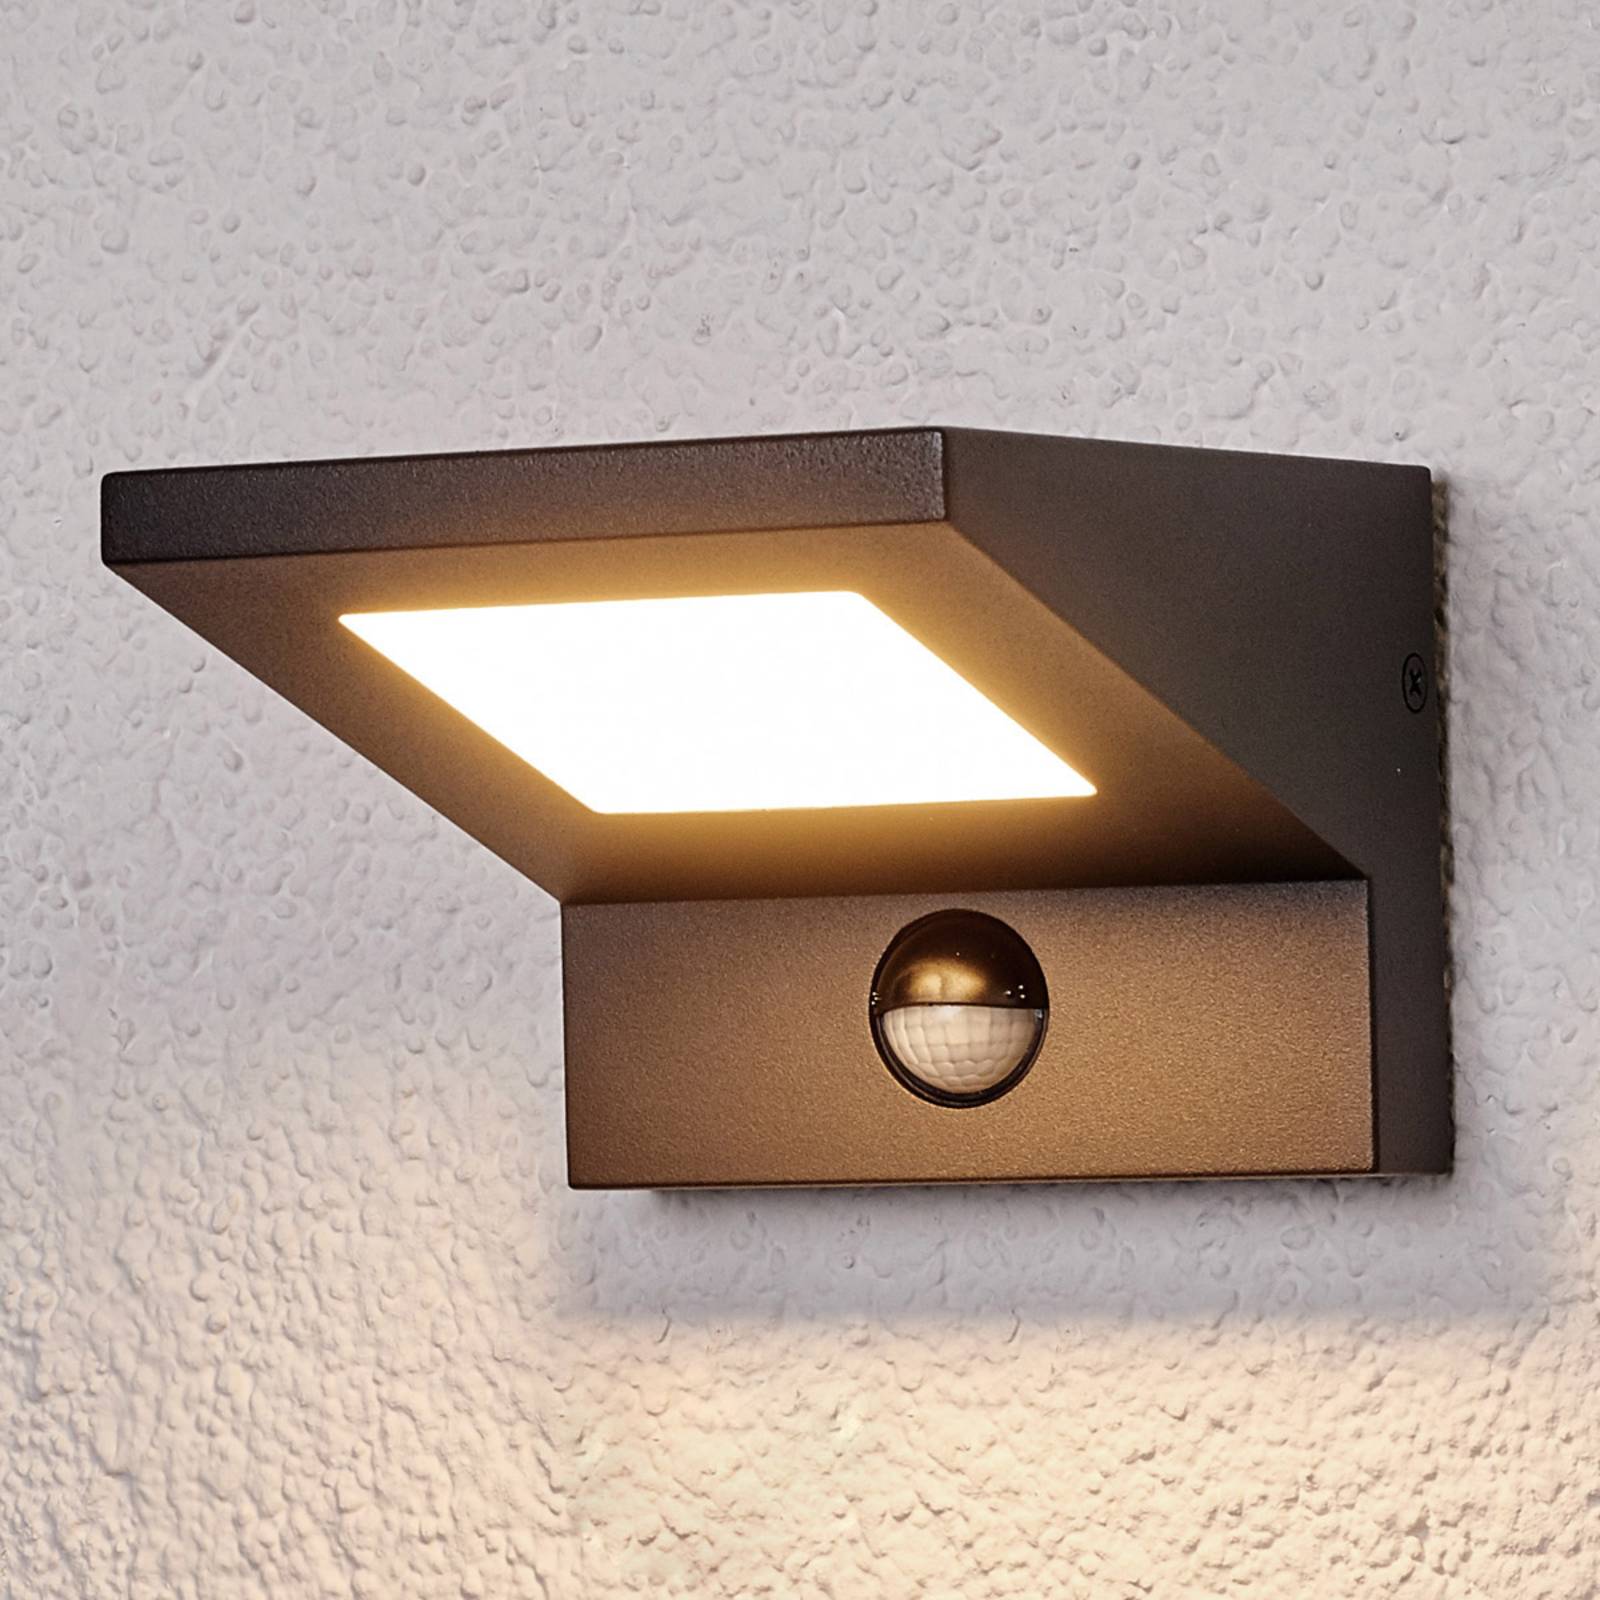 Photos - Floodlight / Street Light Lucande LED outdoor wall light Levvon with motion detector 